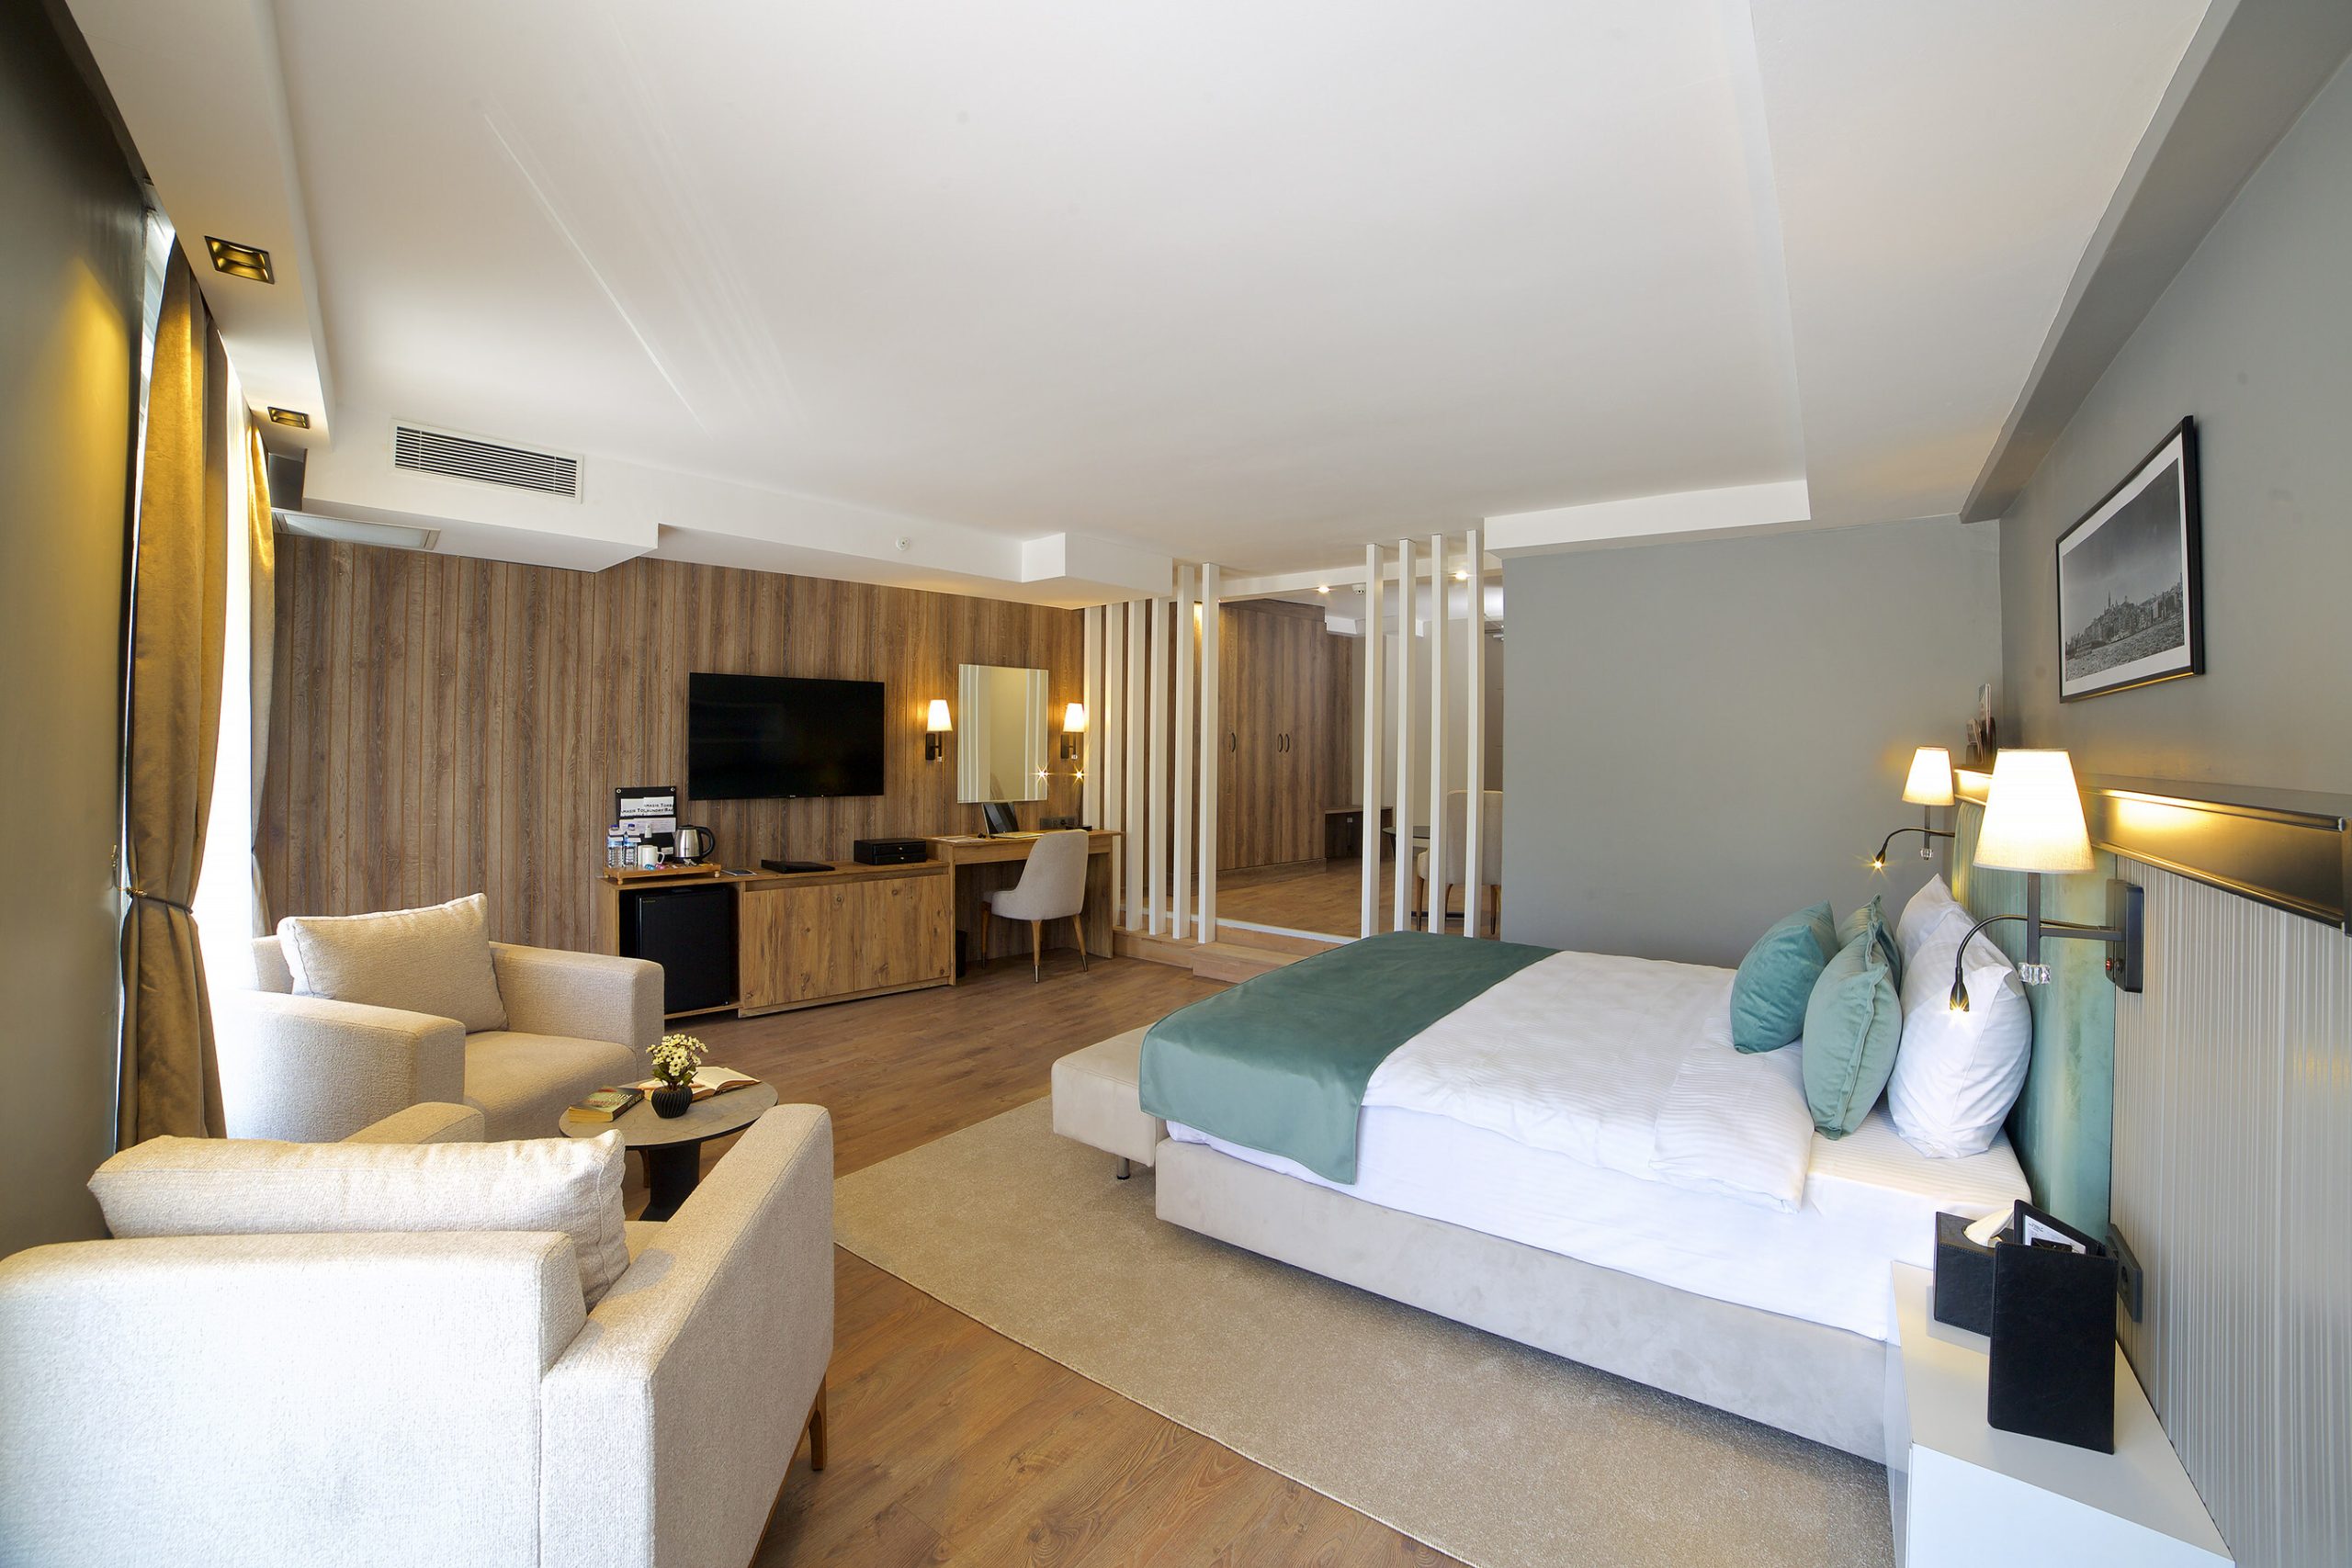 Wyndham opens first Trademark Collection hotel in Istanbul amid stock ...